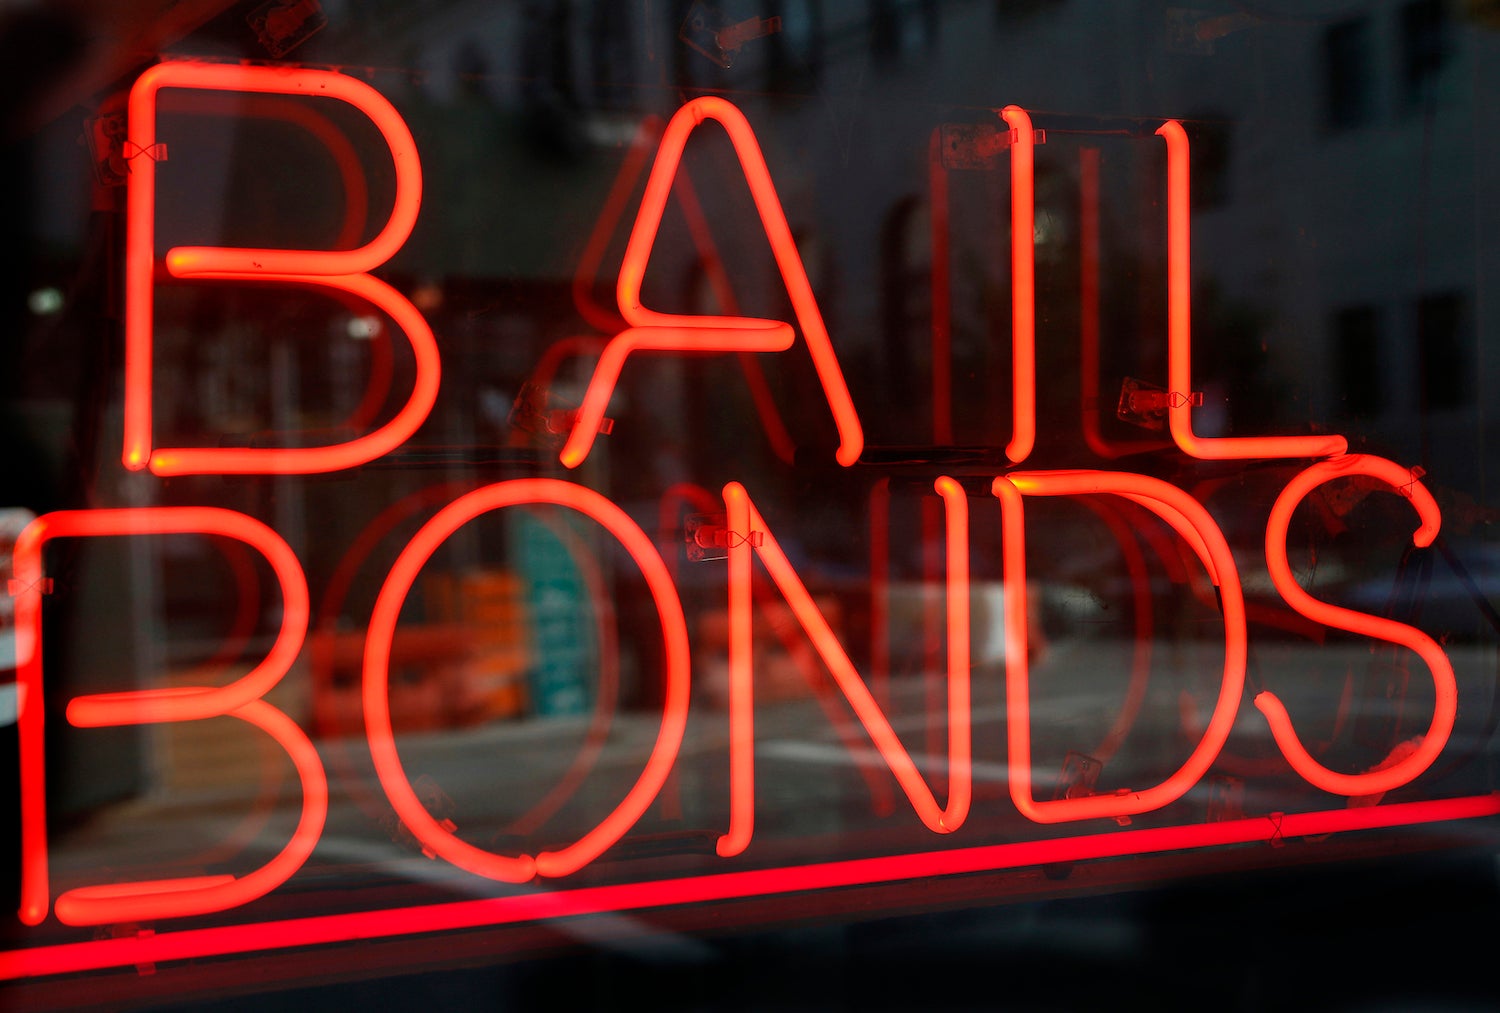 A sign advertising a bail bonds business is displayed near Brooklyn's jail and courthouse complex in New York.